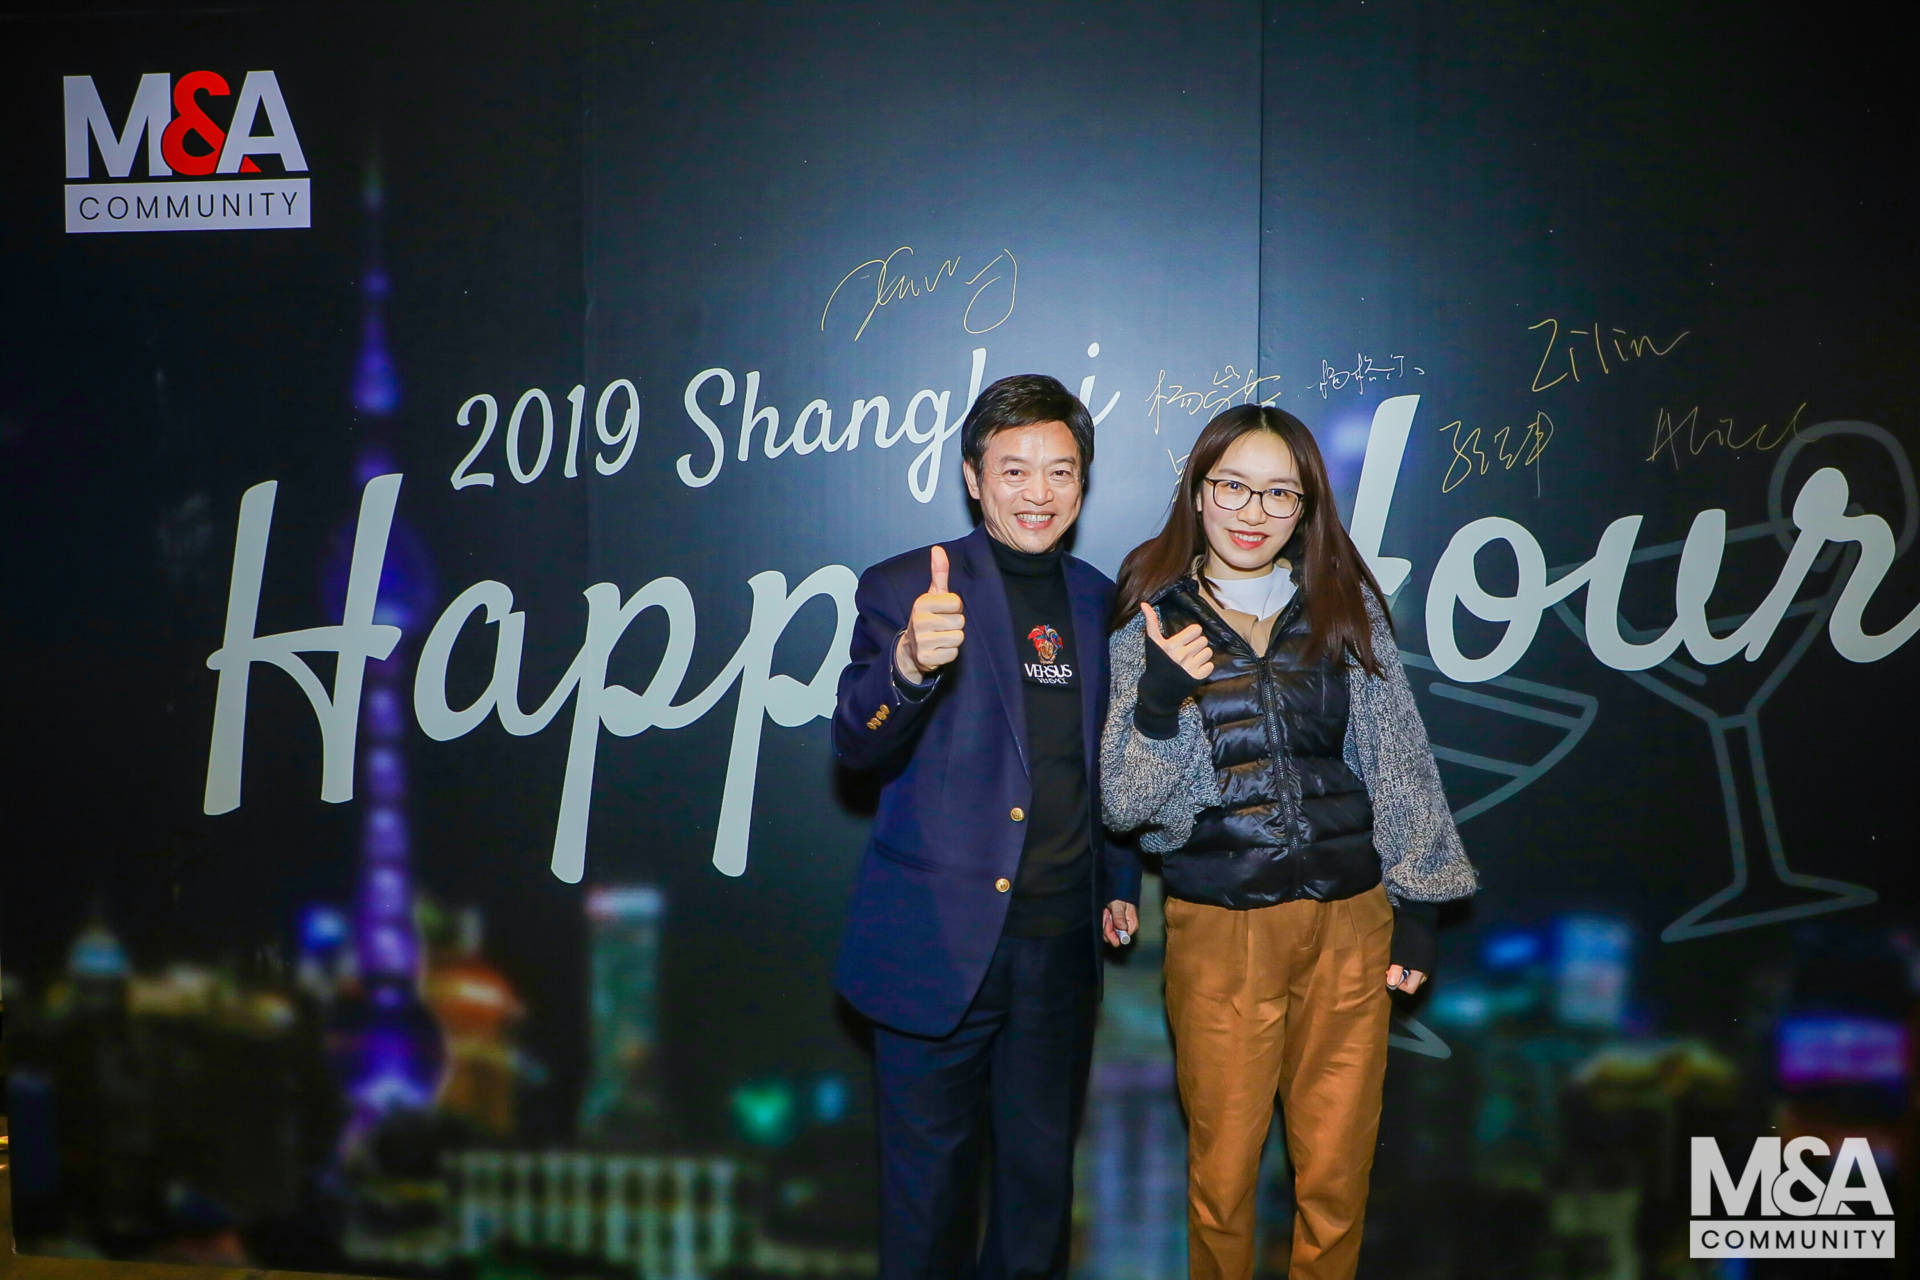 Participants of Christmas event 2019 in Shanghai